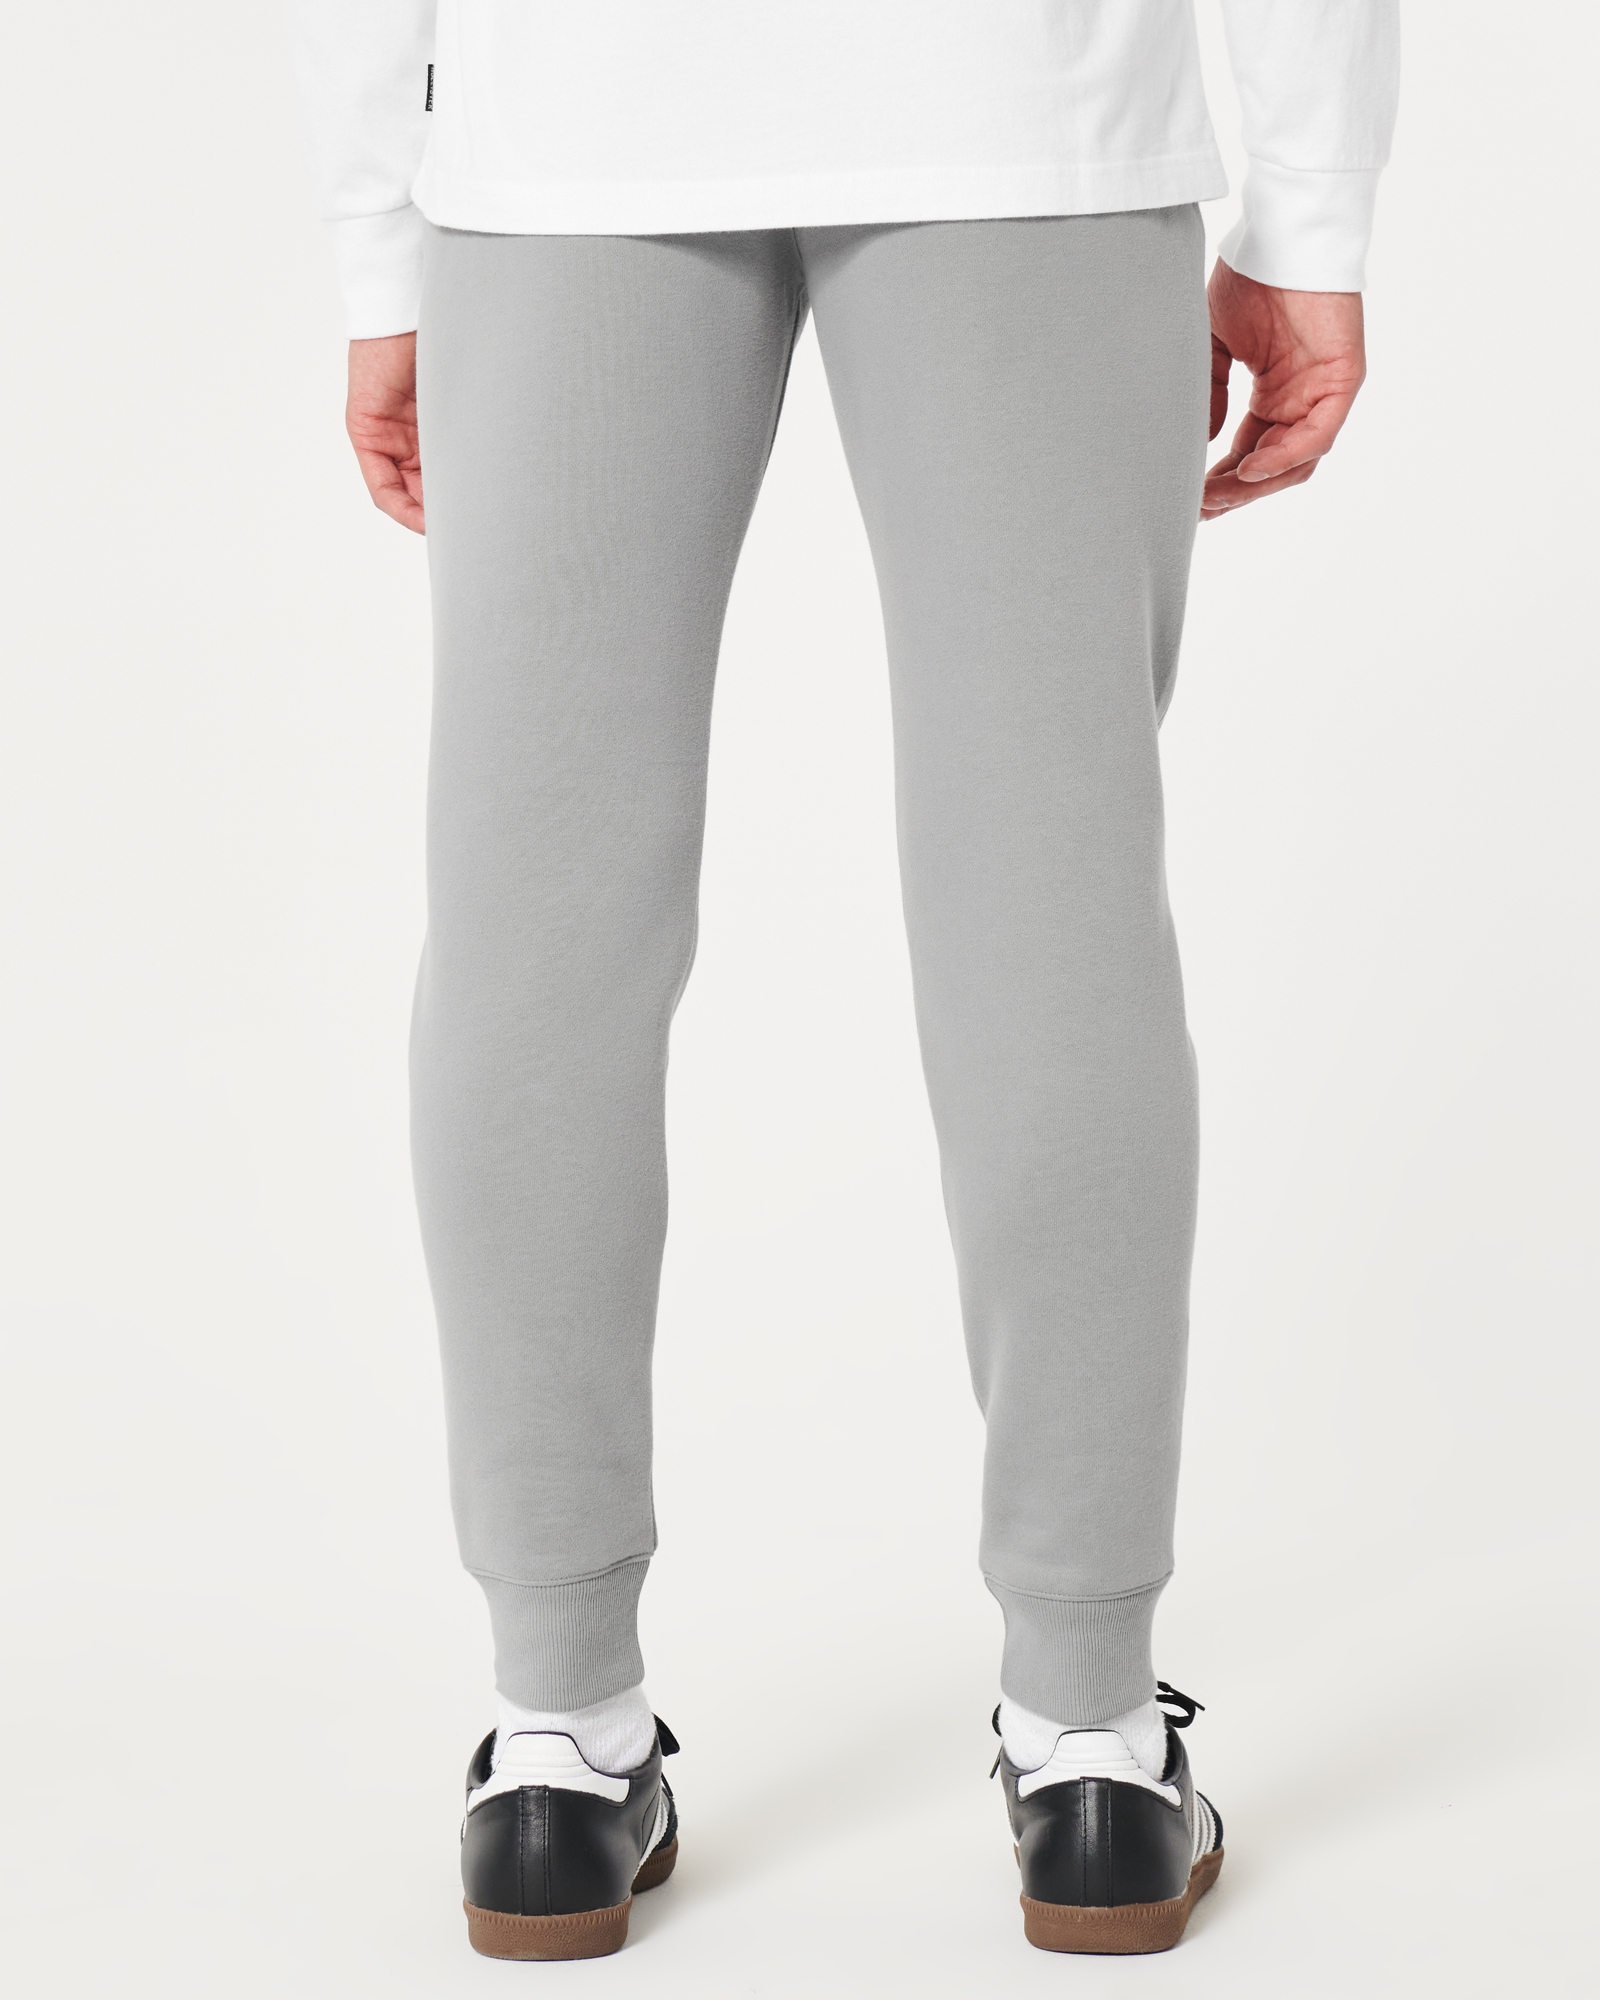 Hollister grey joggers for sale in Co. Wicklow for €15 on DoneDeal